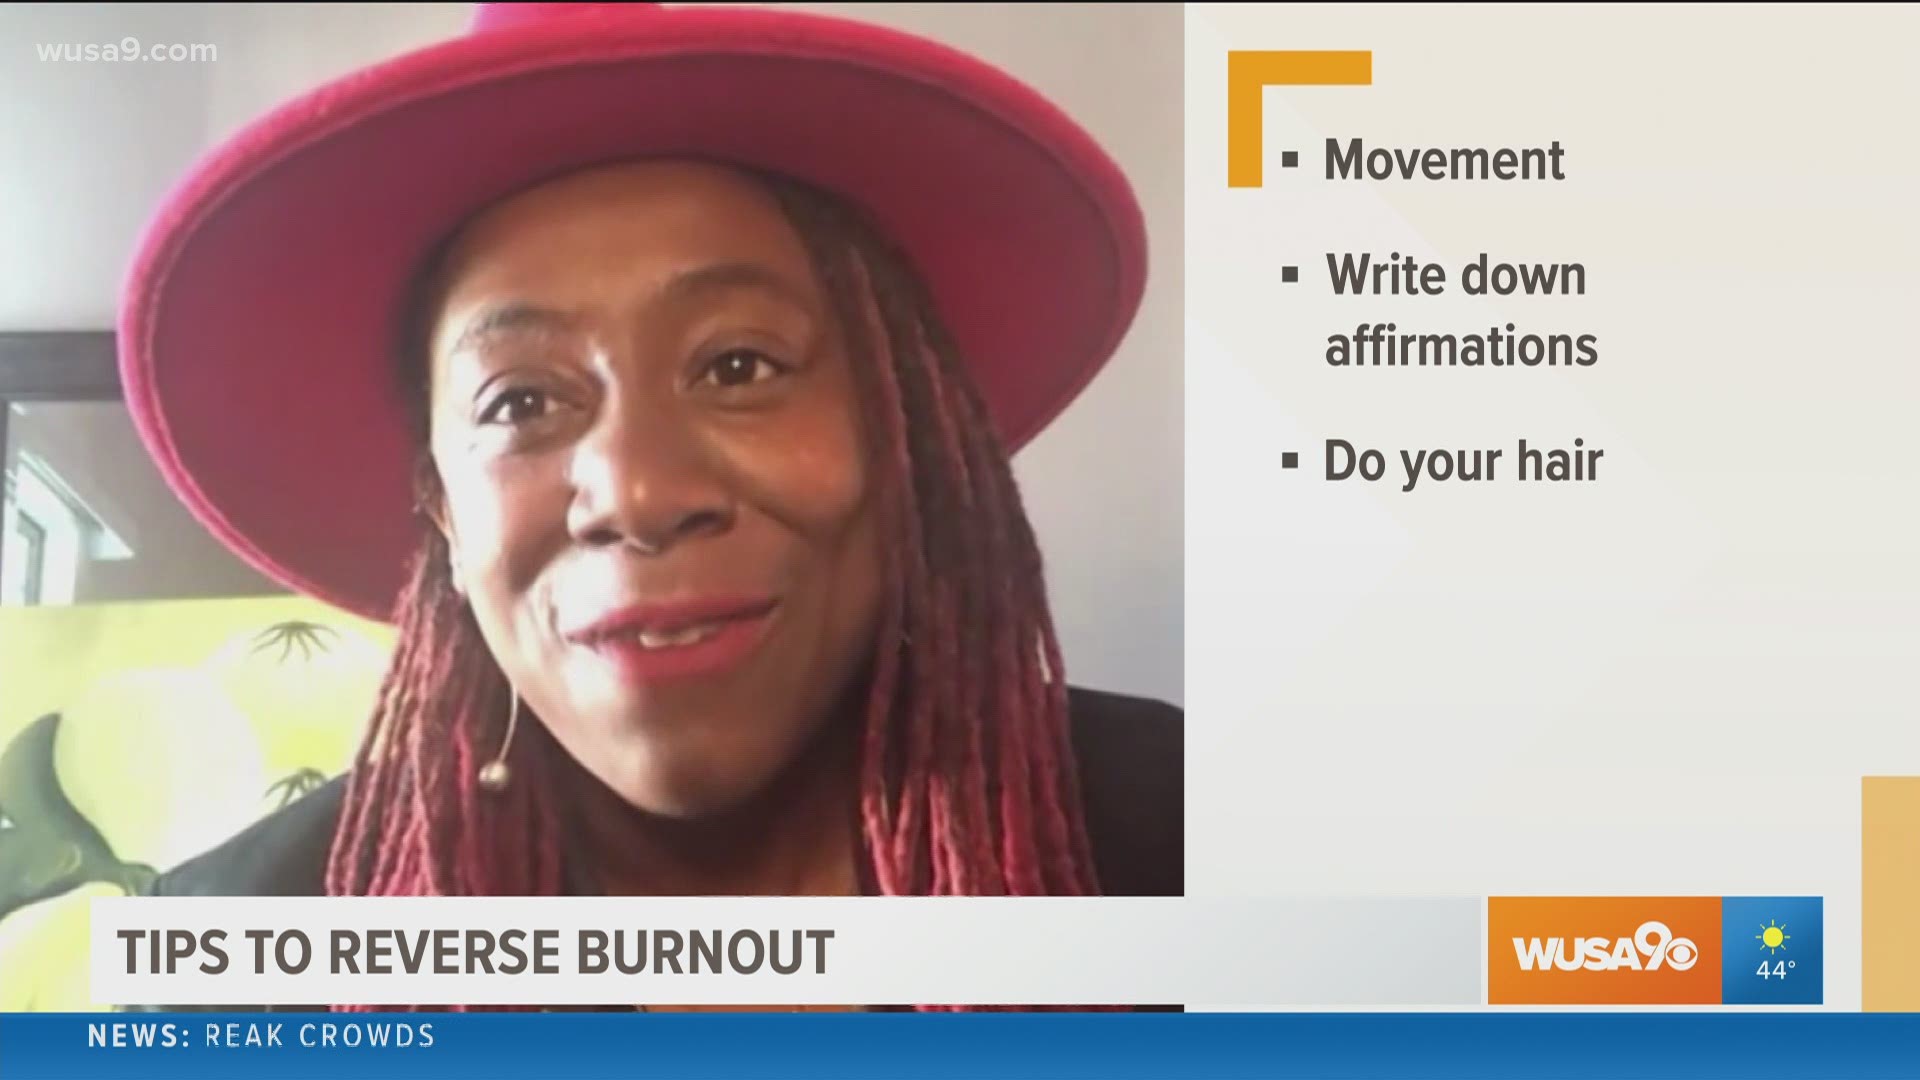 Author of "Black Girl In Love (With Herself)", Trey Anthony shares some tips to reverse burnout.